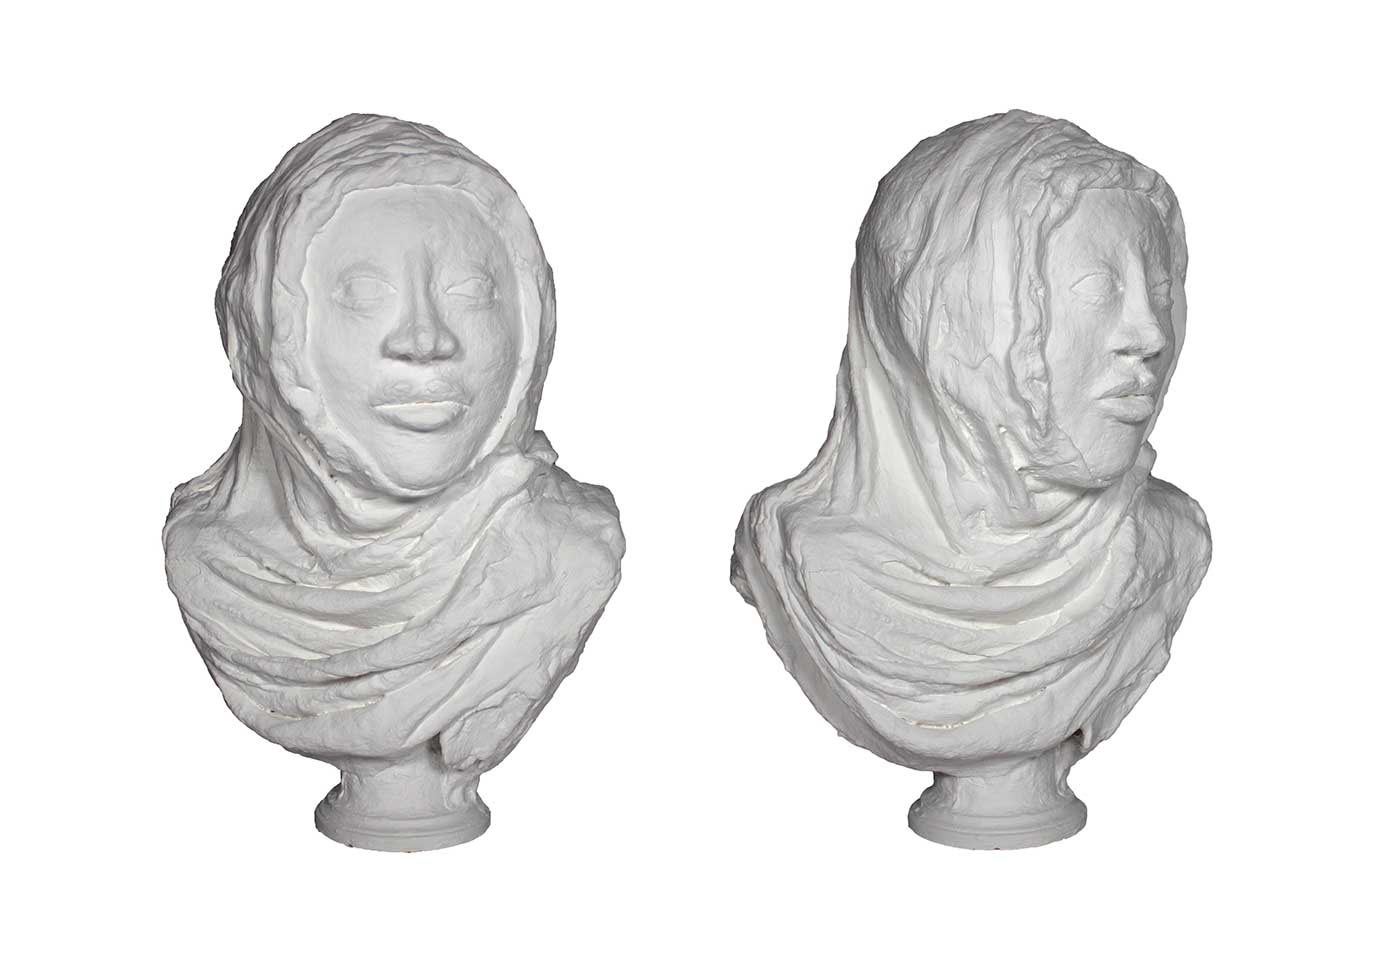 Beige sculpture of a woman's head and upper torso wearing a hijab.